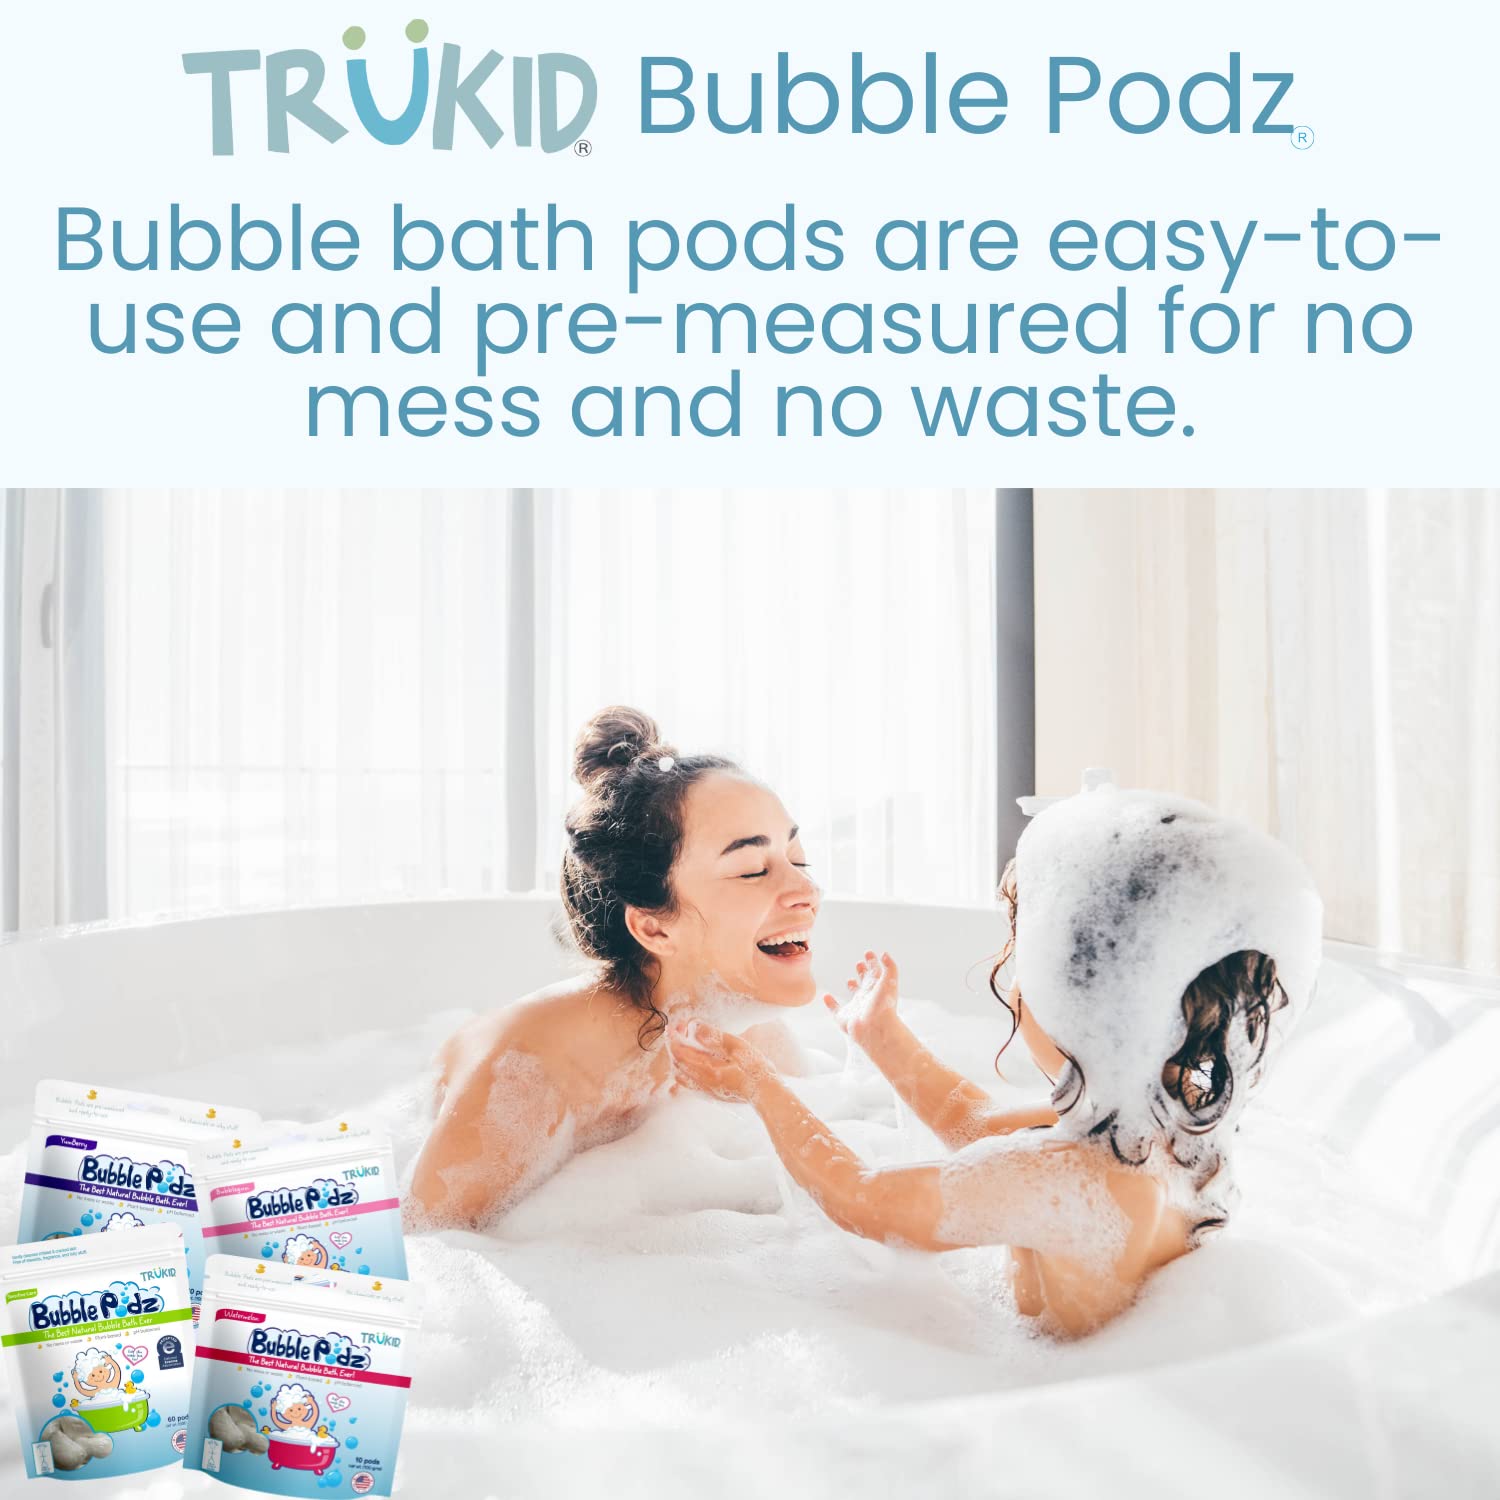 TruKid Bubble Podz Bubble Bath for Baby & Kids, Gentle Refreshing Bath Bomb for Sensitive Skin, pH Balance 7 for Eye Sensitivity, Natural Moisturizers and Ingredients, Yumberry (24 Podz)